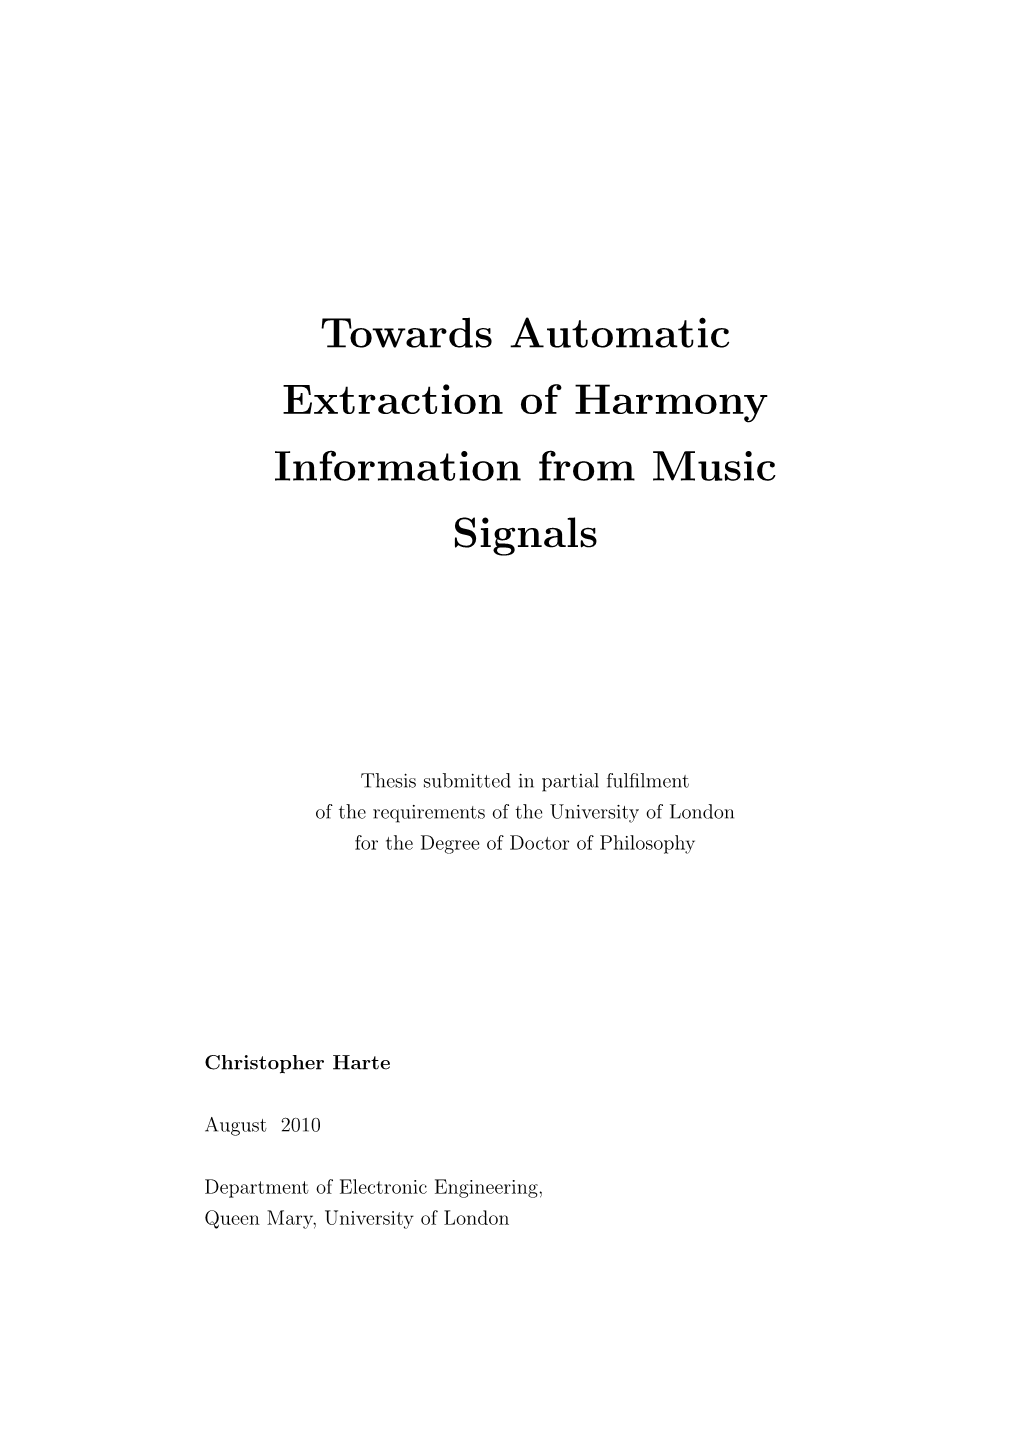 Towards Automatic Extraction of Harmony Information from Music Signals